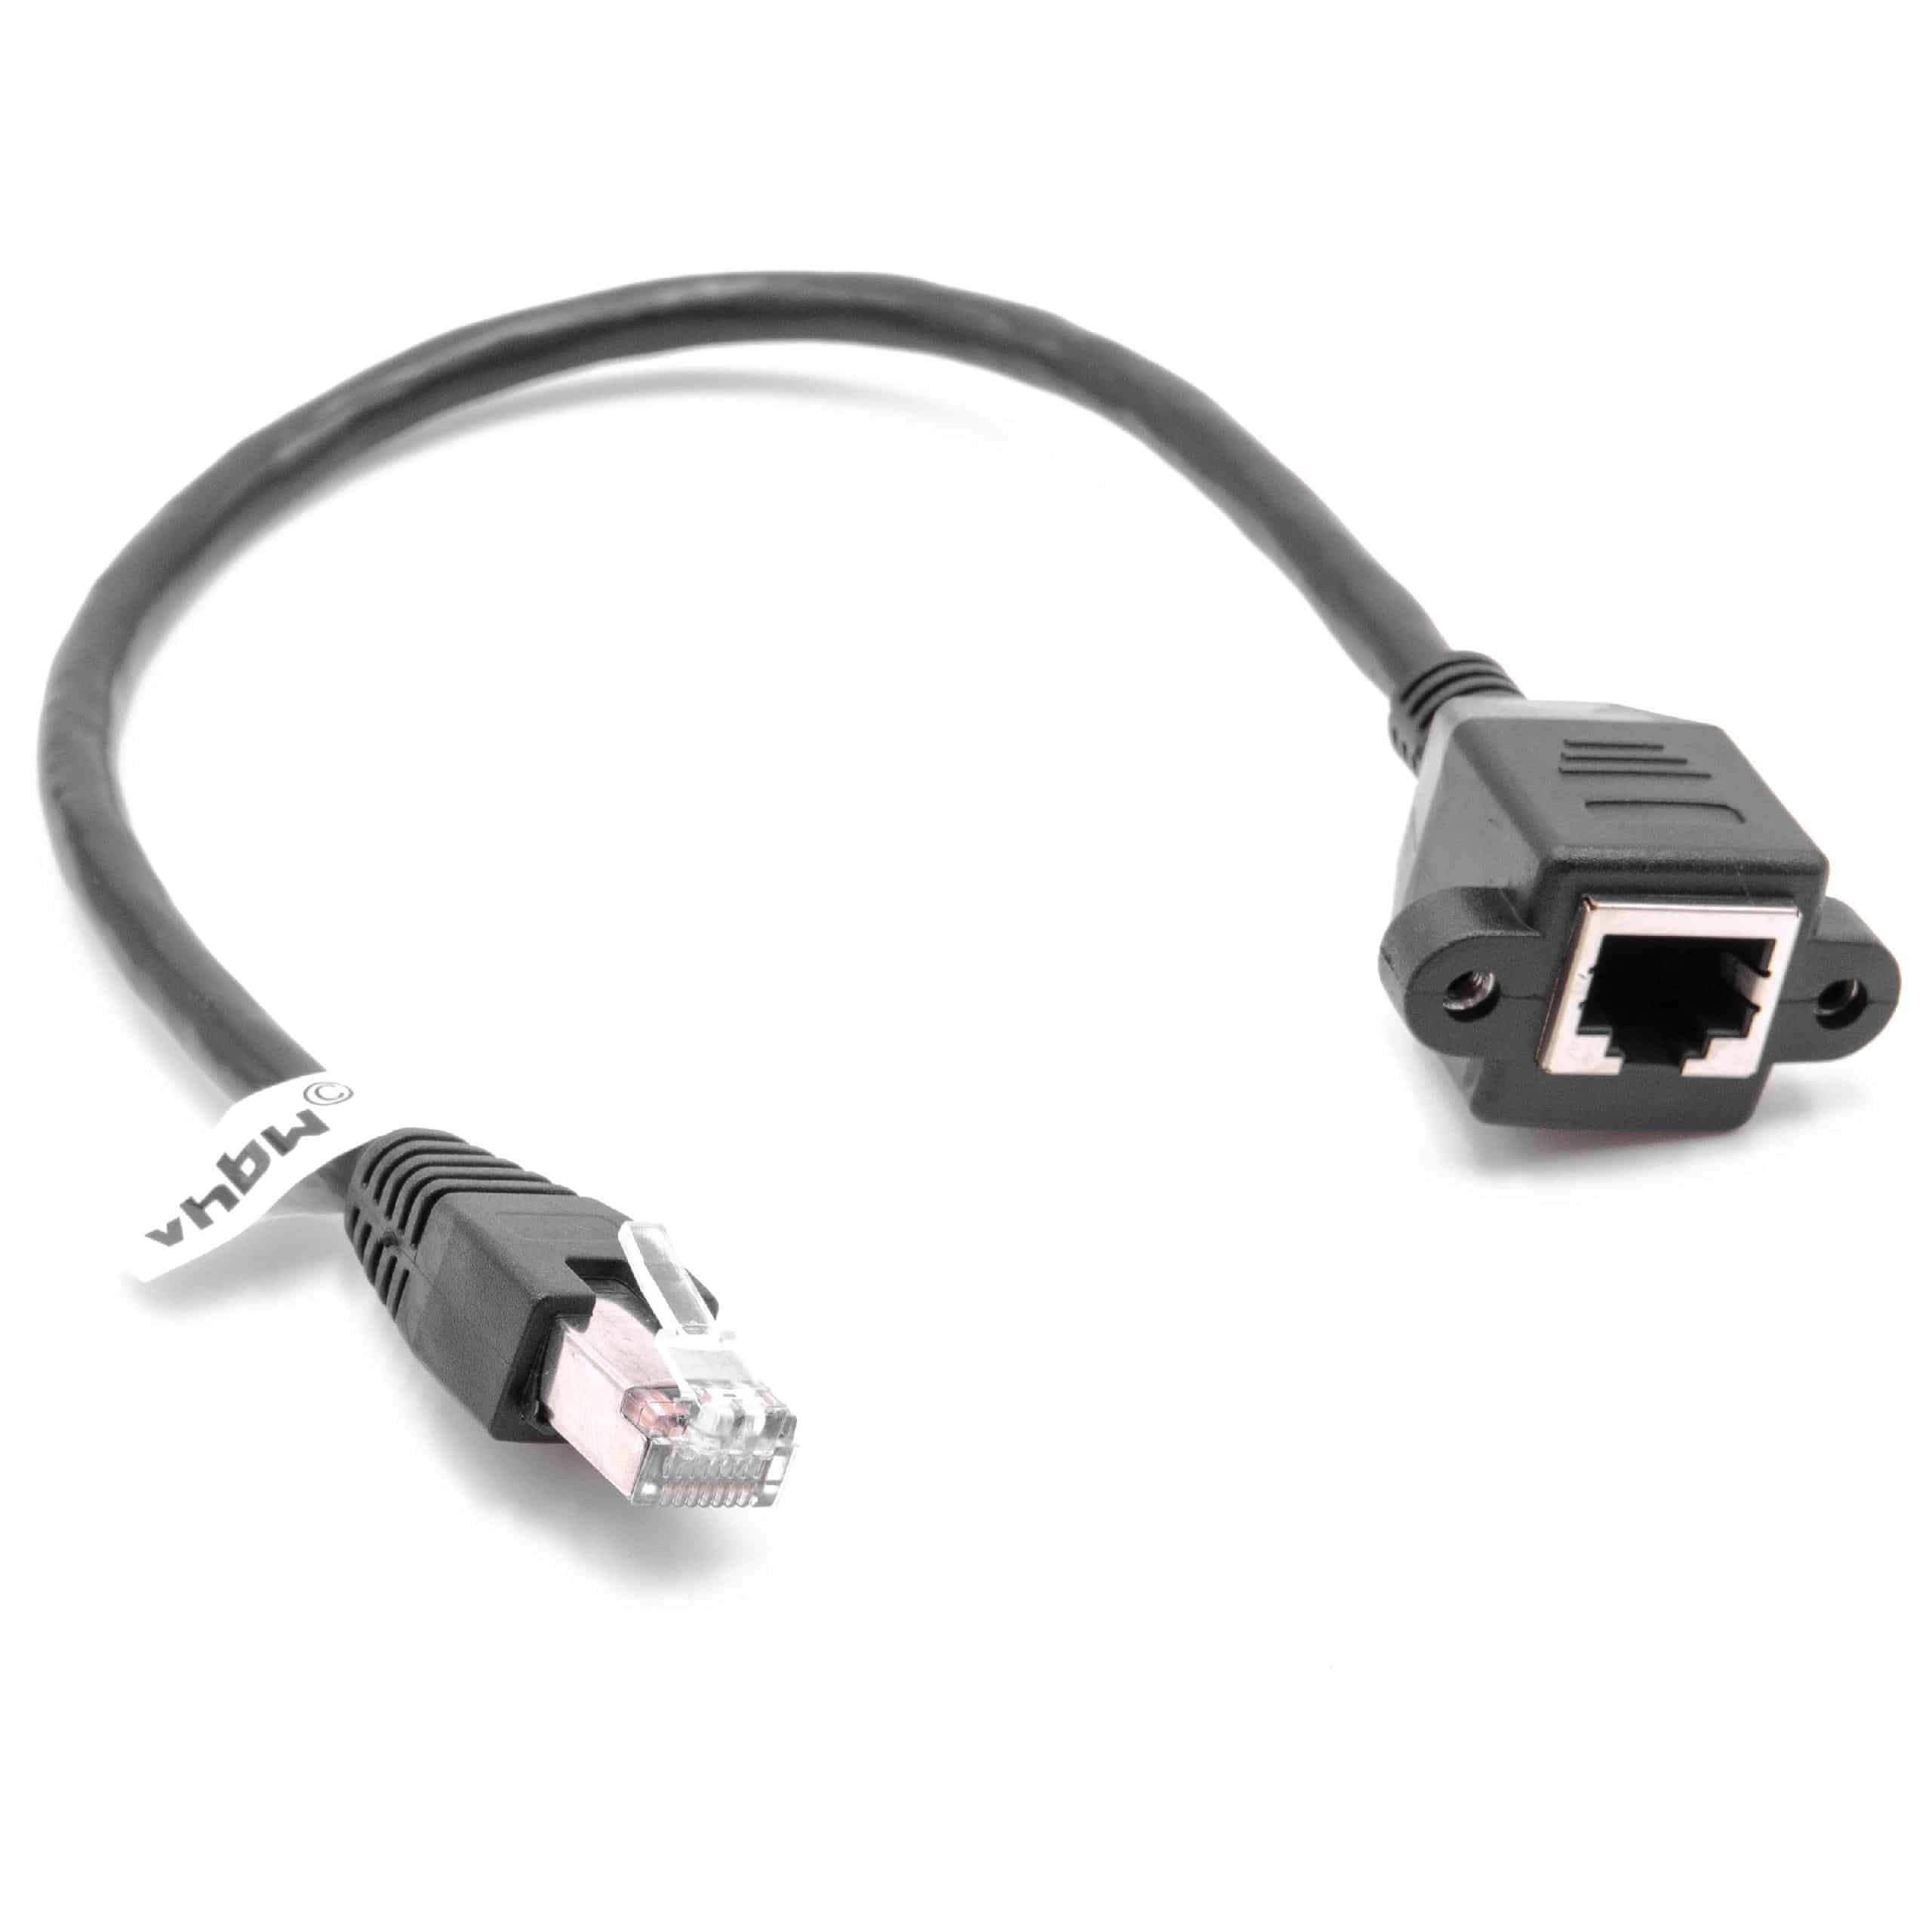 Cat6 Extension Cable RJ45 Plug to RJ45 Socket - Ethernet LAN Cable with RJ45 Built-In Socket, 0.3 m